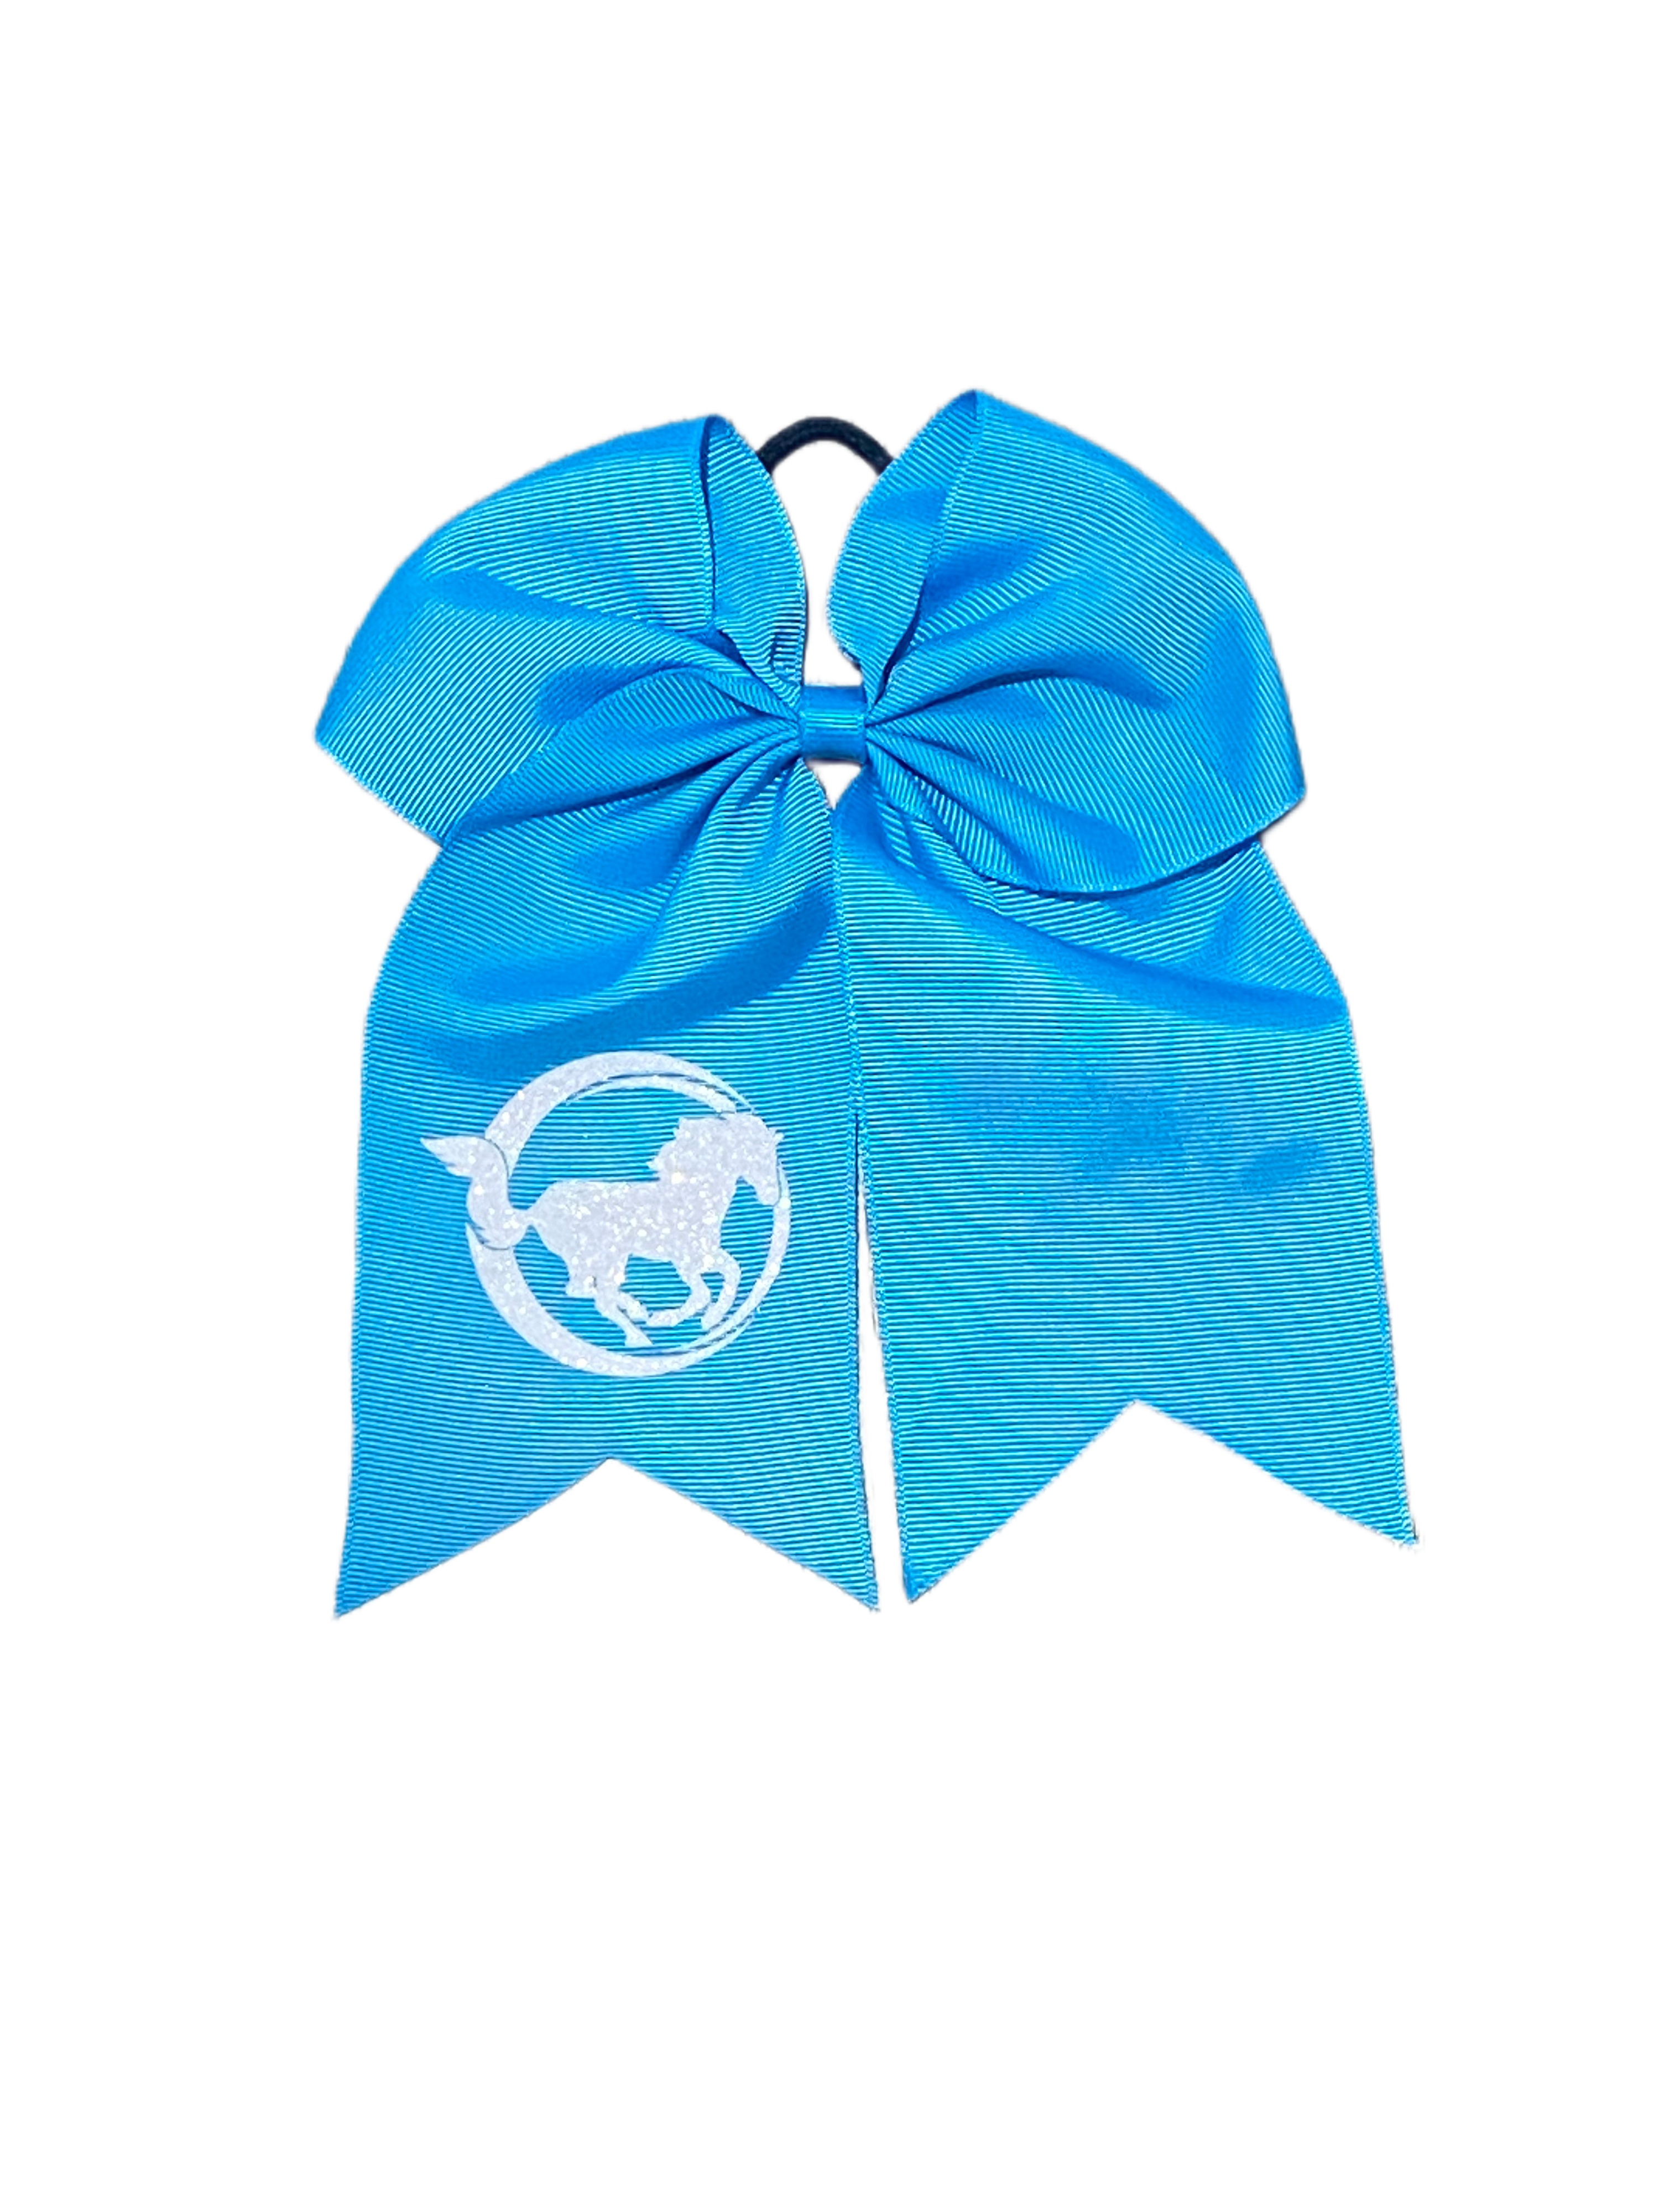 Colorful Practice Bows